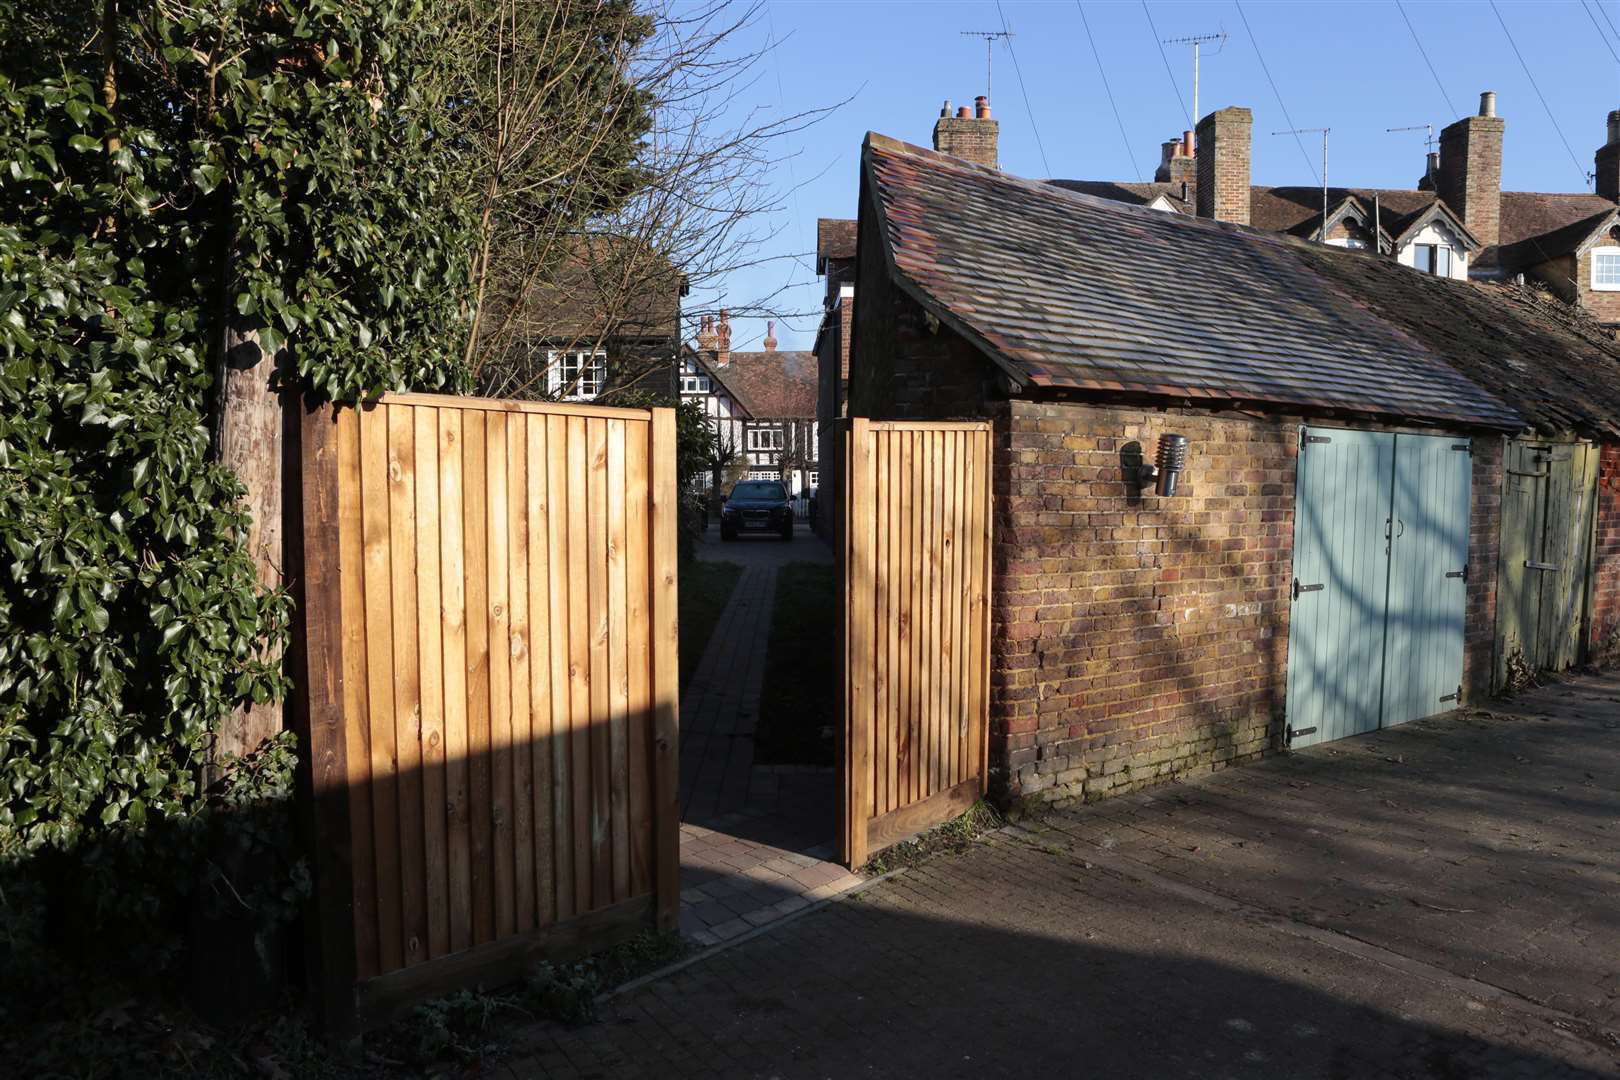 The rear view of the alleyway as it is today